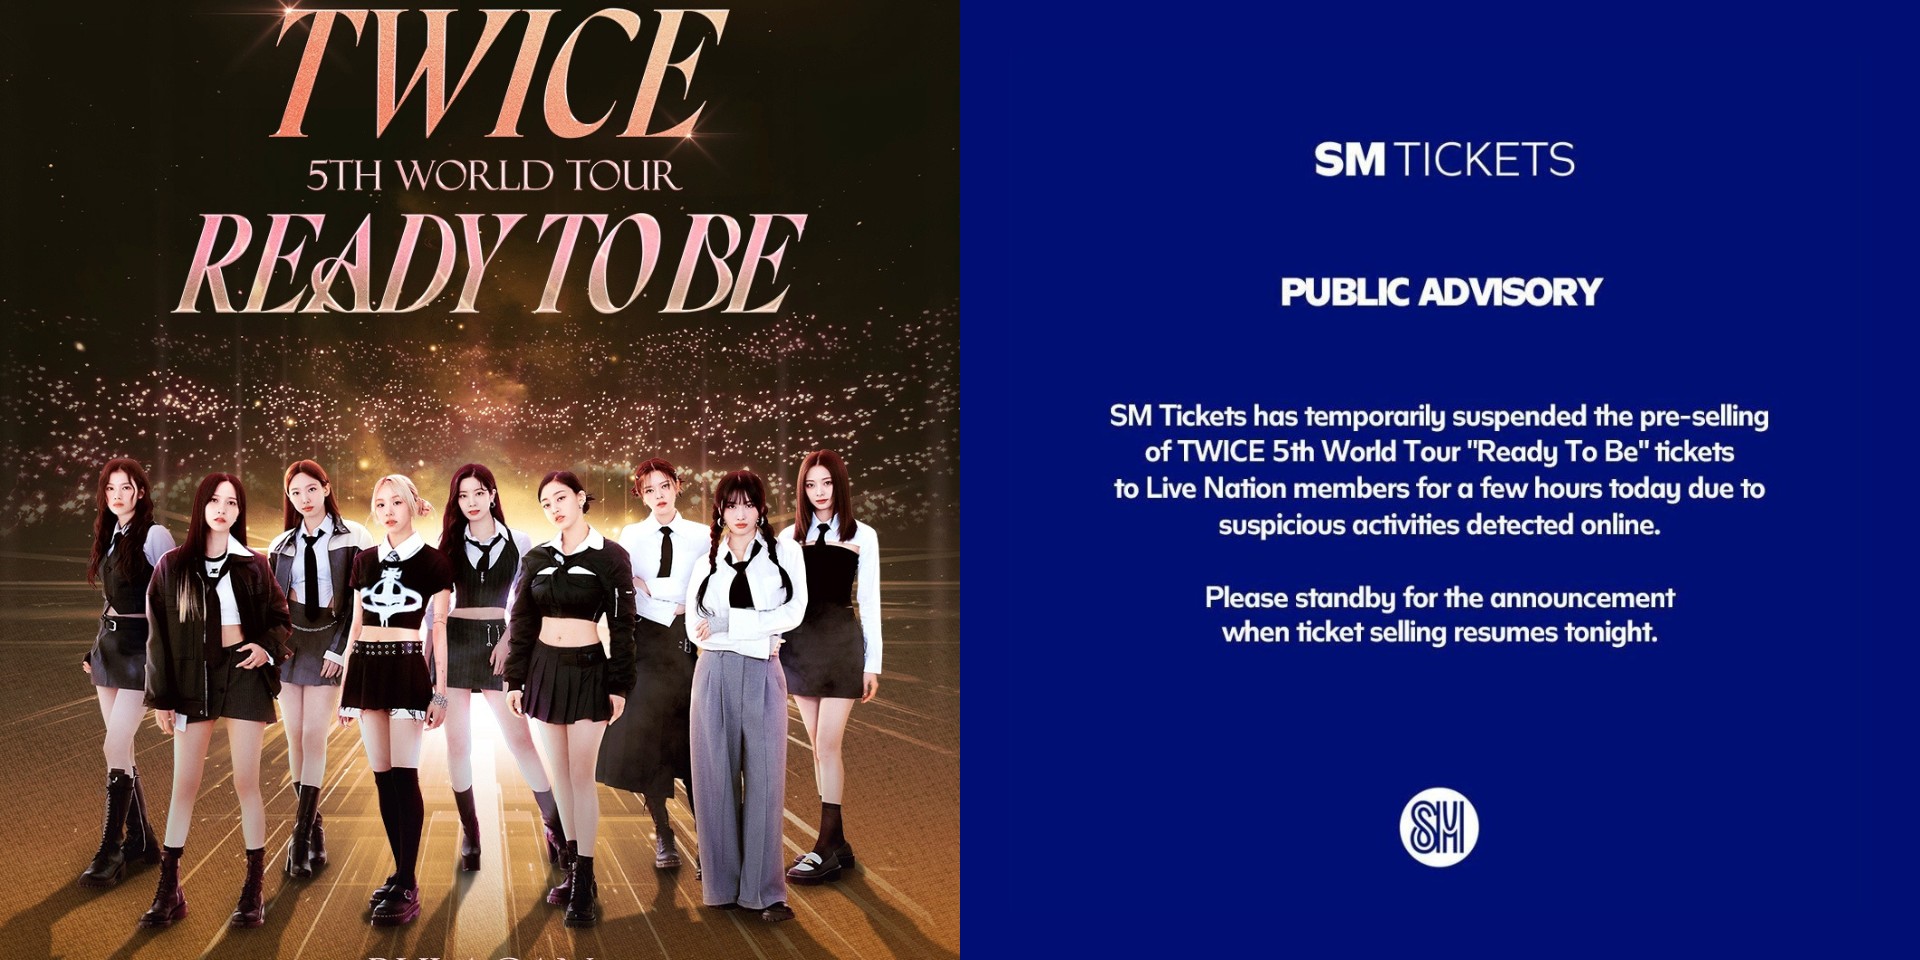 Score tickets to TWICE 5th World Tour Ready To Be concert